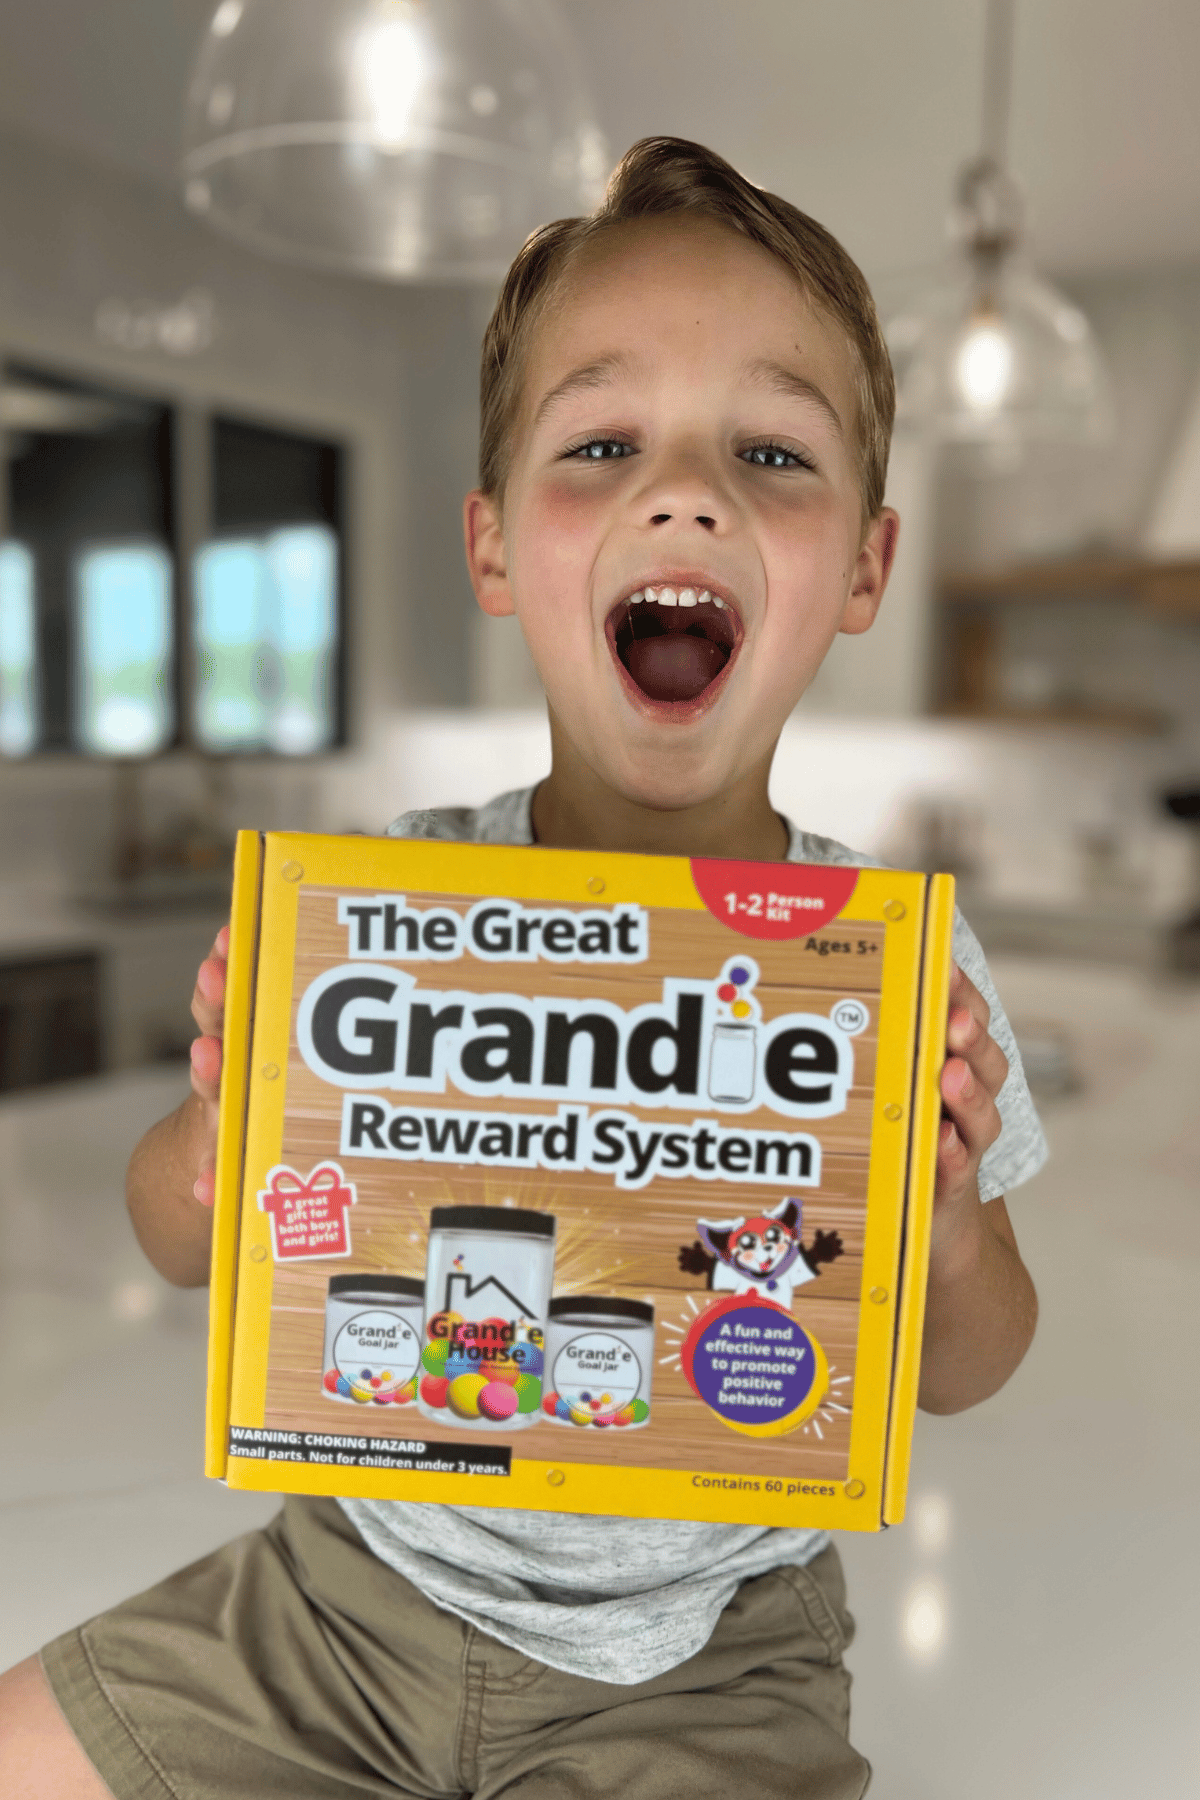 Young child holding The Great Grandie Reward System box with a huge joyful expression on his face.